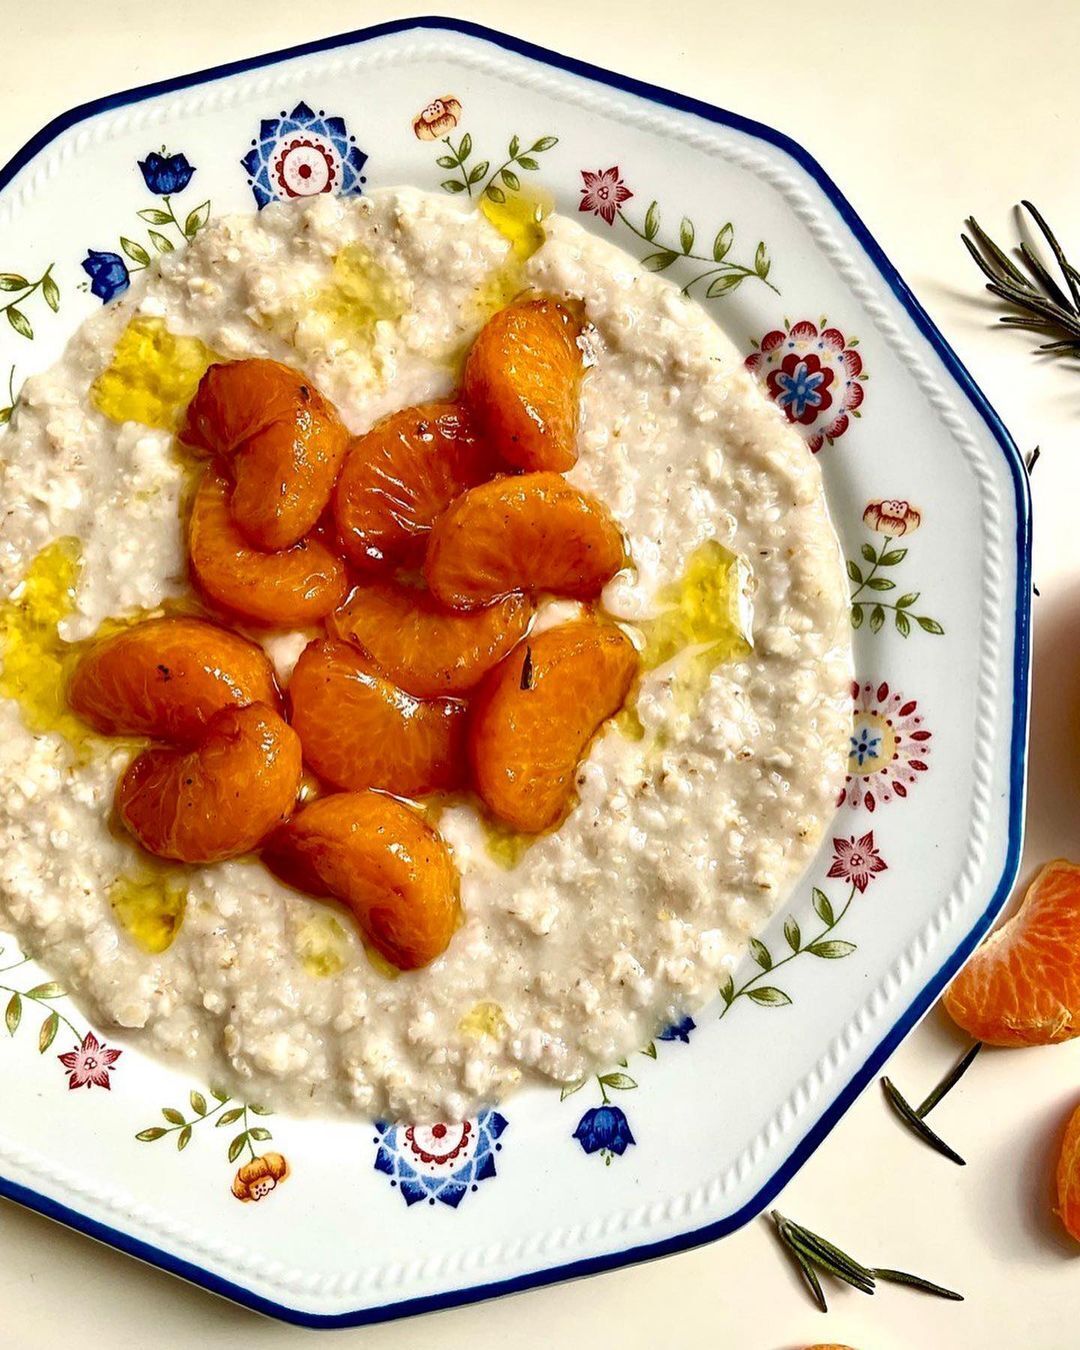 Prepared oatmeal with tangerines